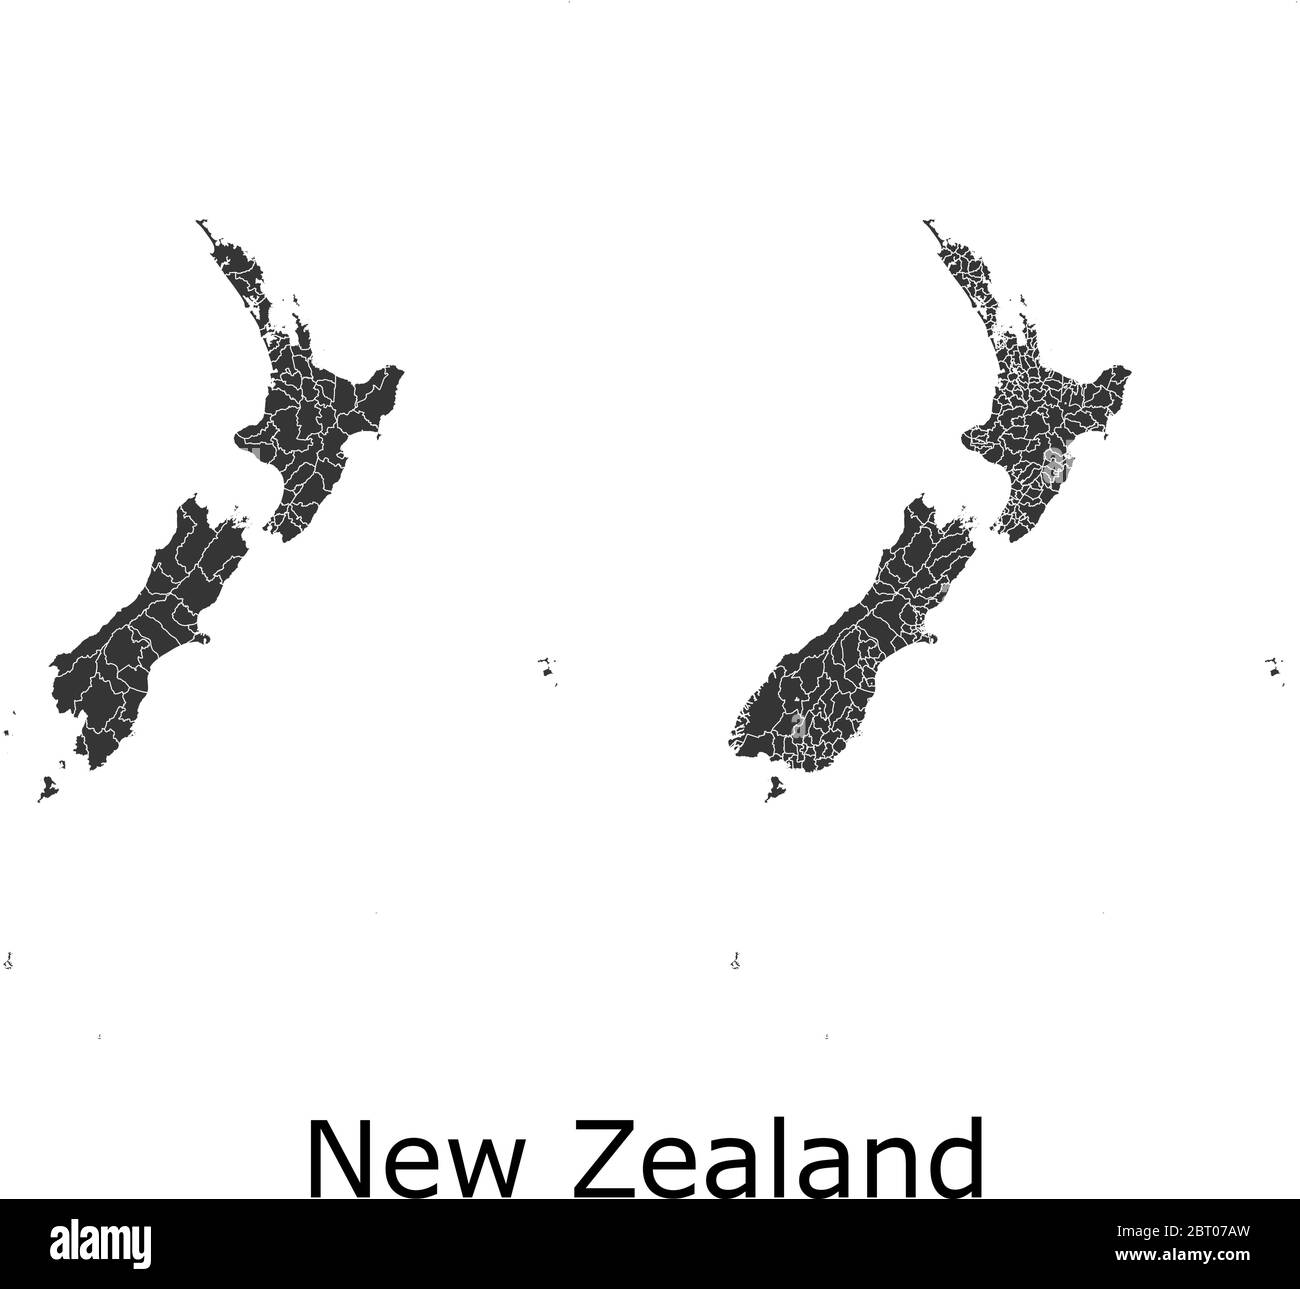 New Zealand vector maps with administrative regions, municipalities, departments, borders Stock Vector